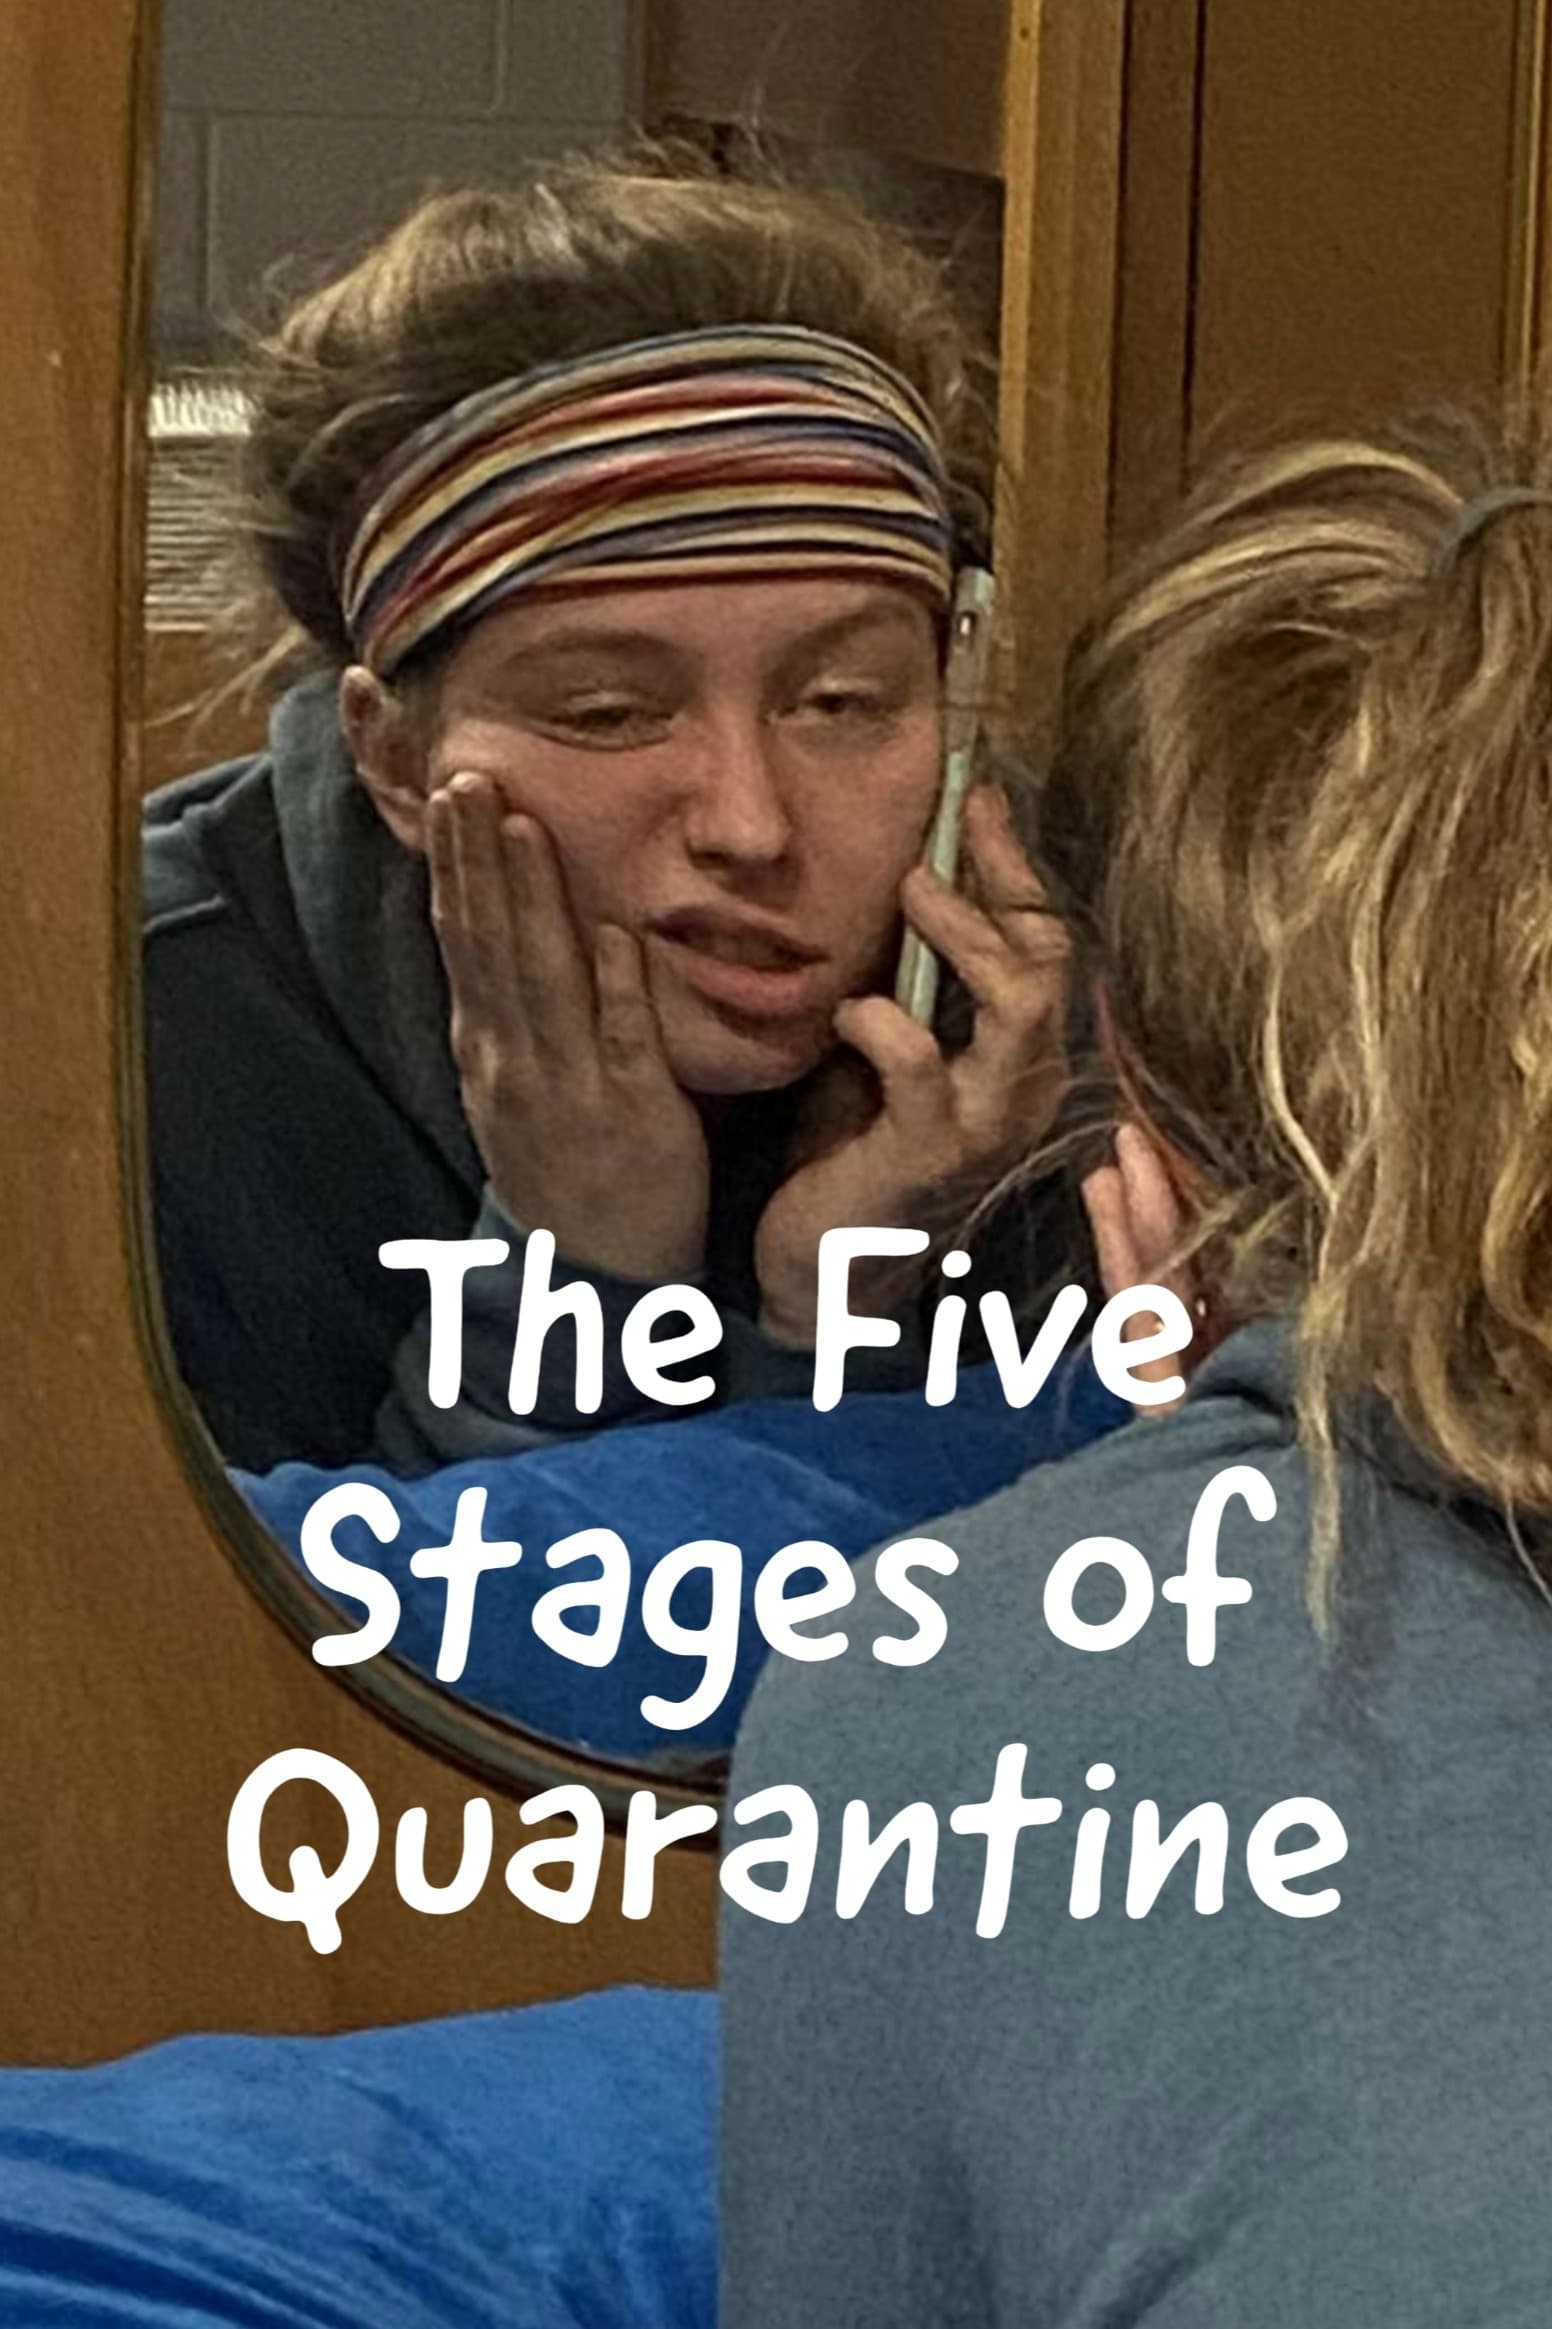 The Five Stages of Quarantine